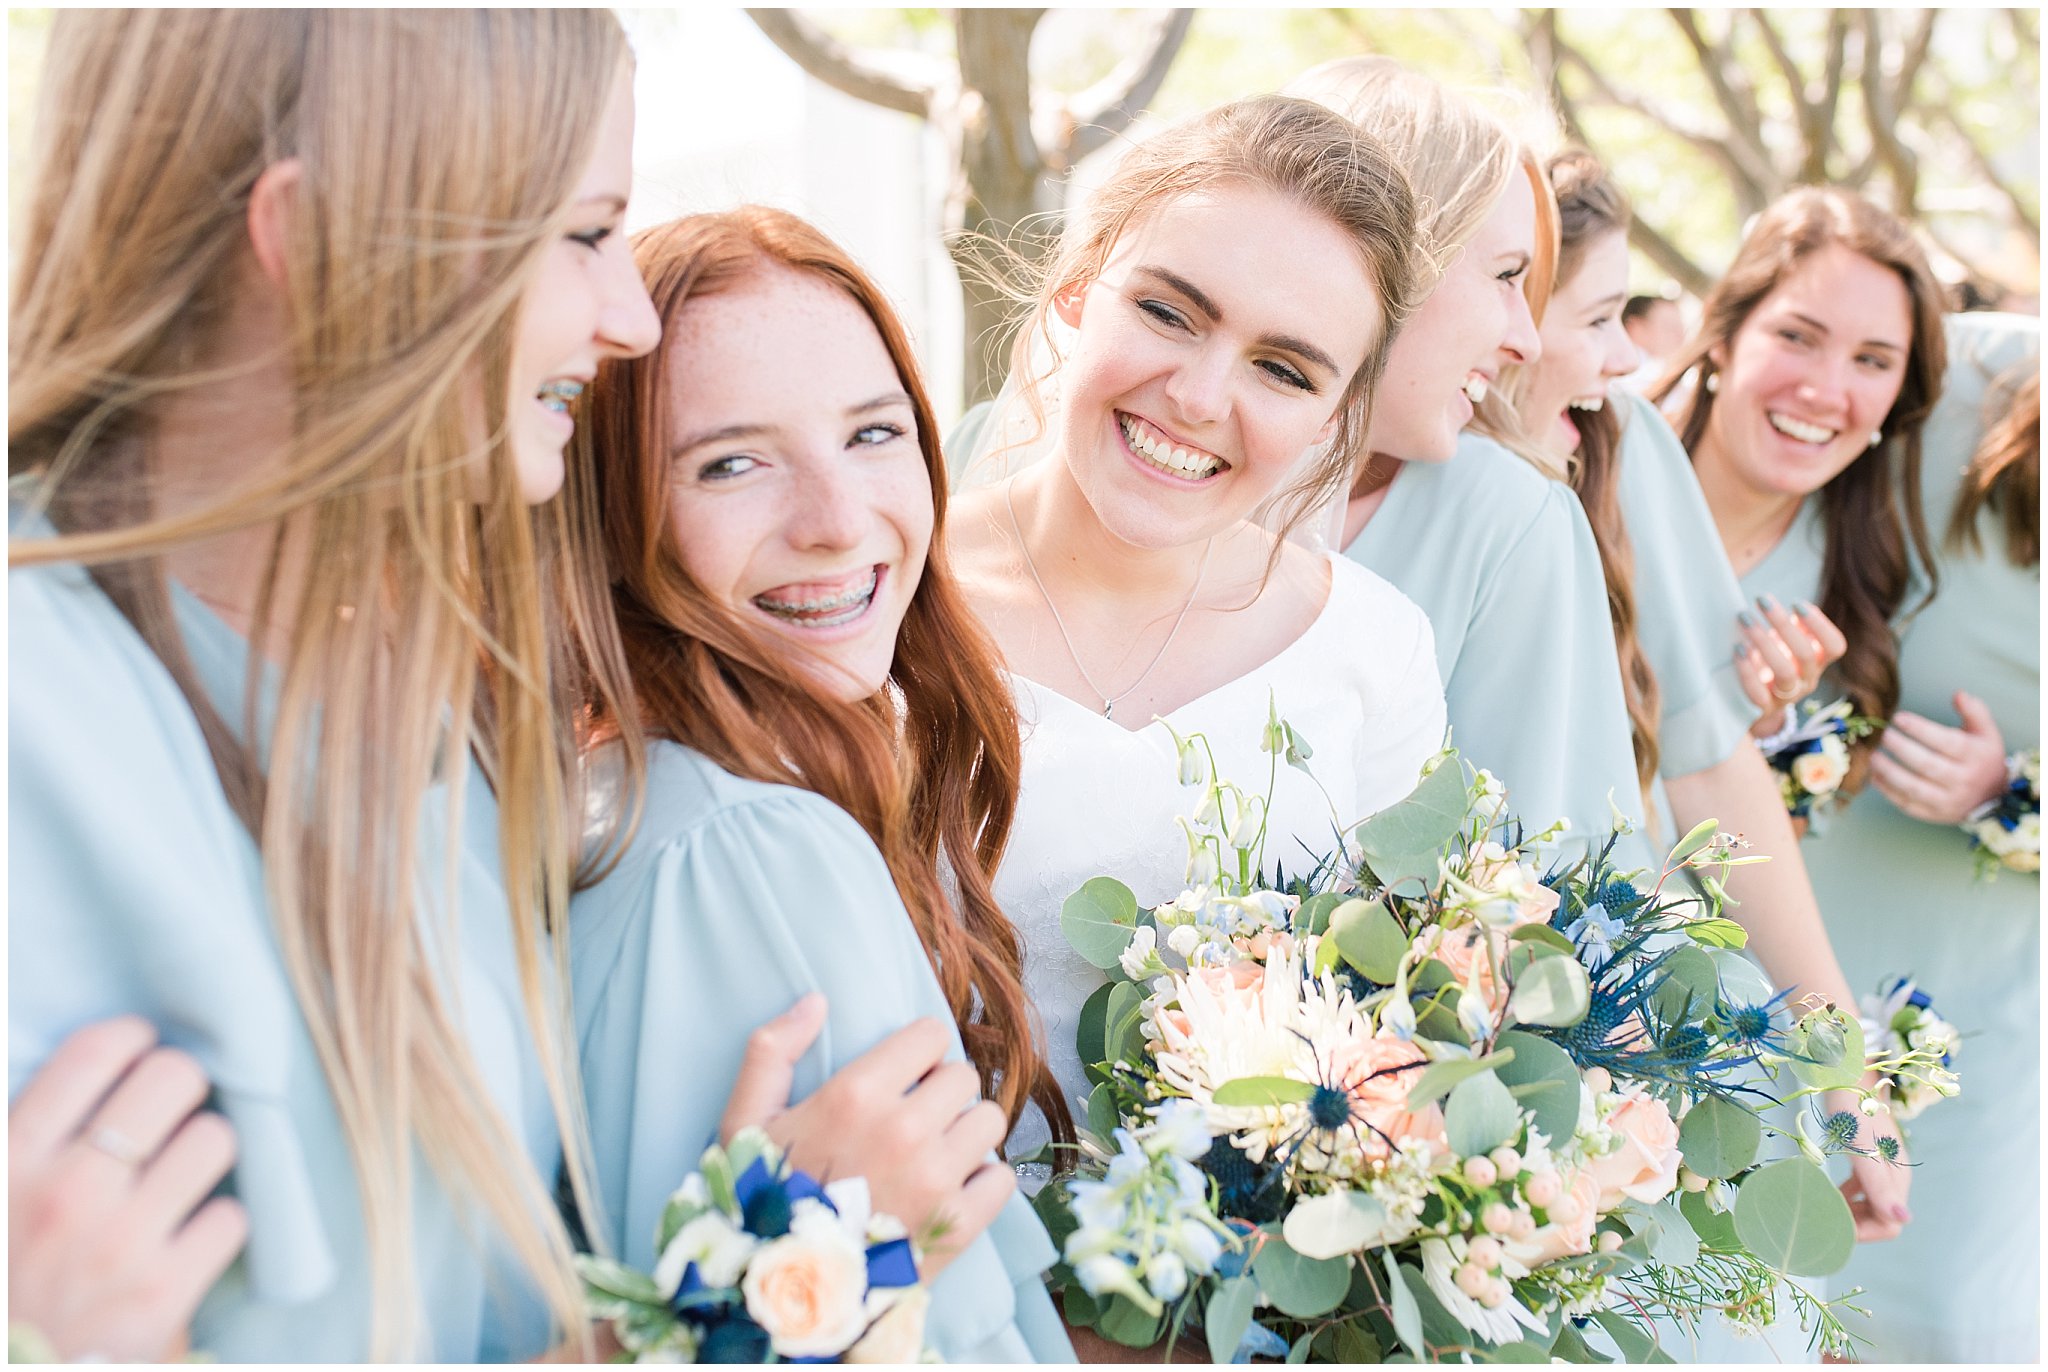 Bride with bridesmaids wearing sage dresses with corsages on wrists | Bountiful Temple Wedding and Oak Hills Reception | Jessie and Dallin Photography